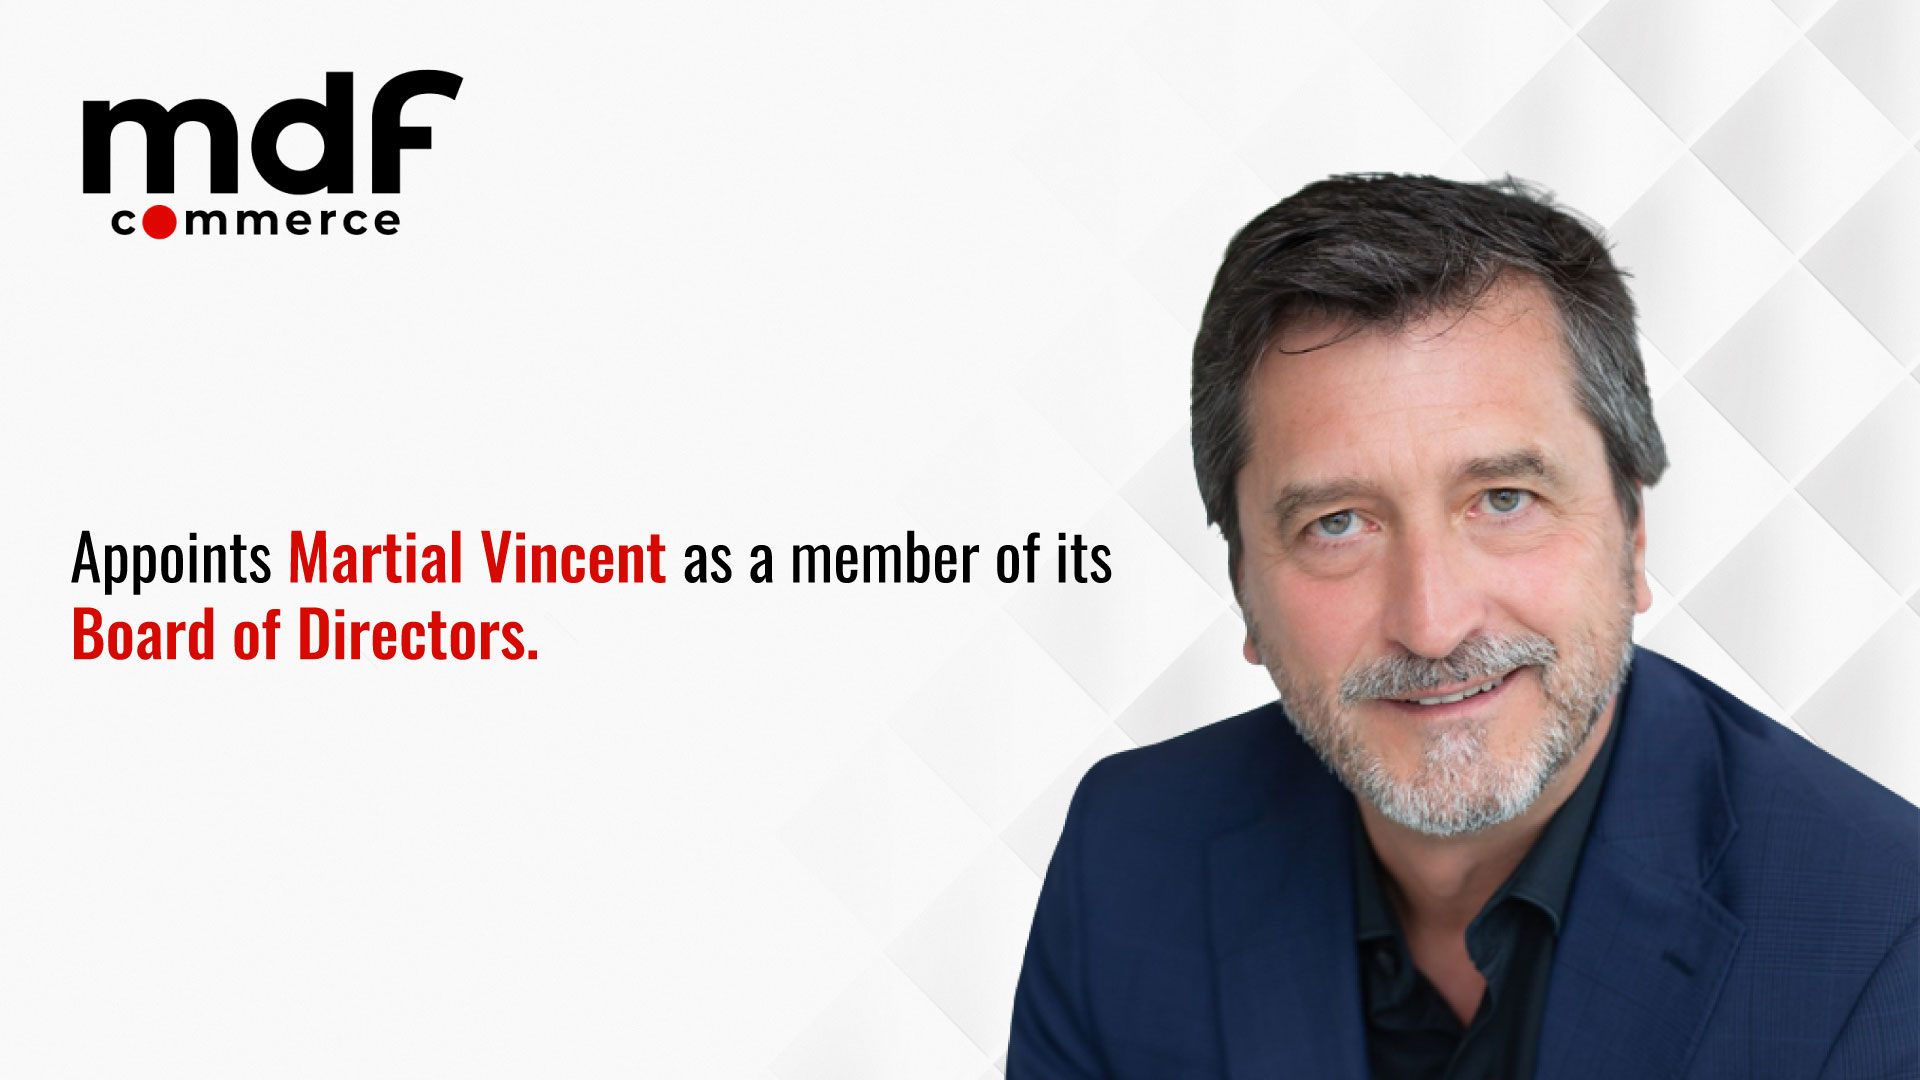 mdf commerce’s Board of Directors is enhanced by the appointment of Martial Vincent